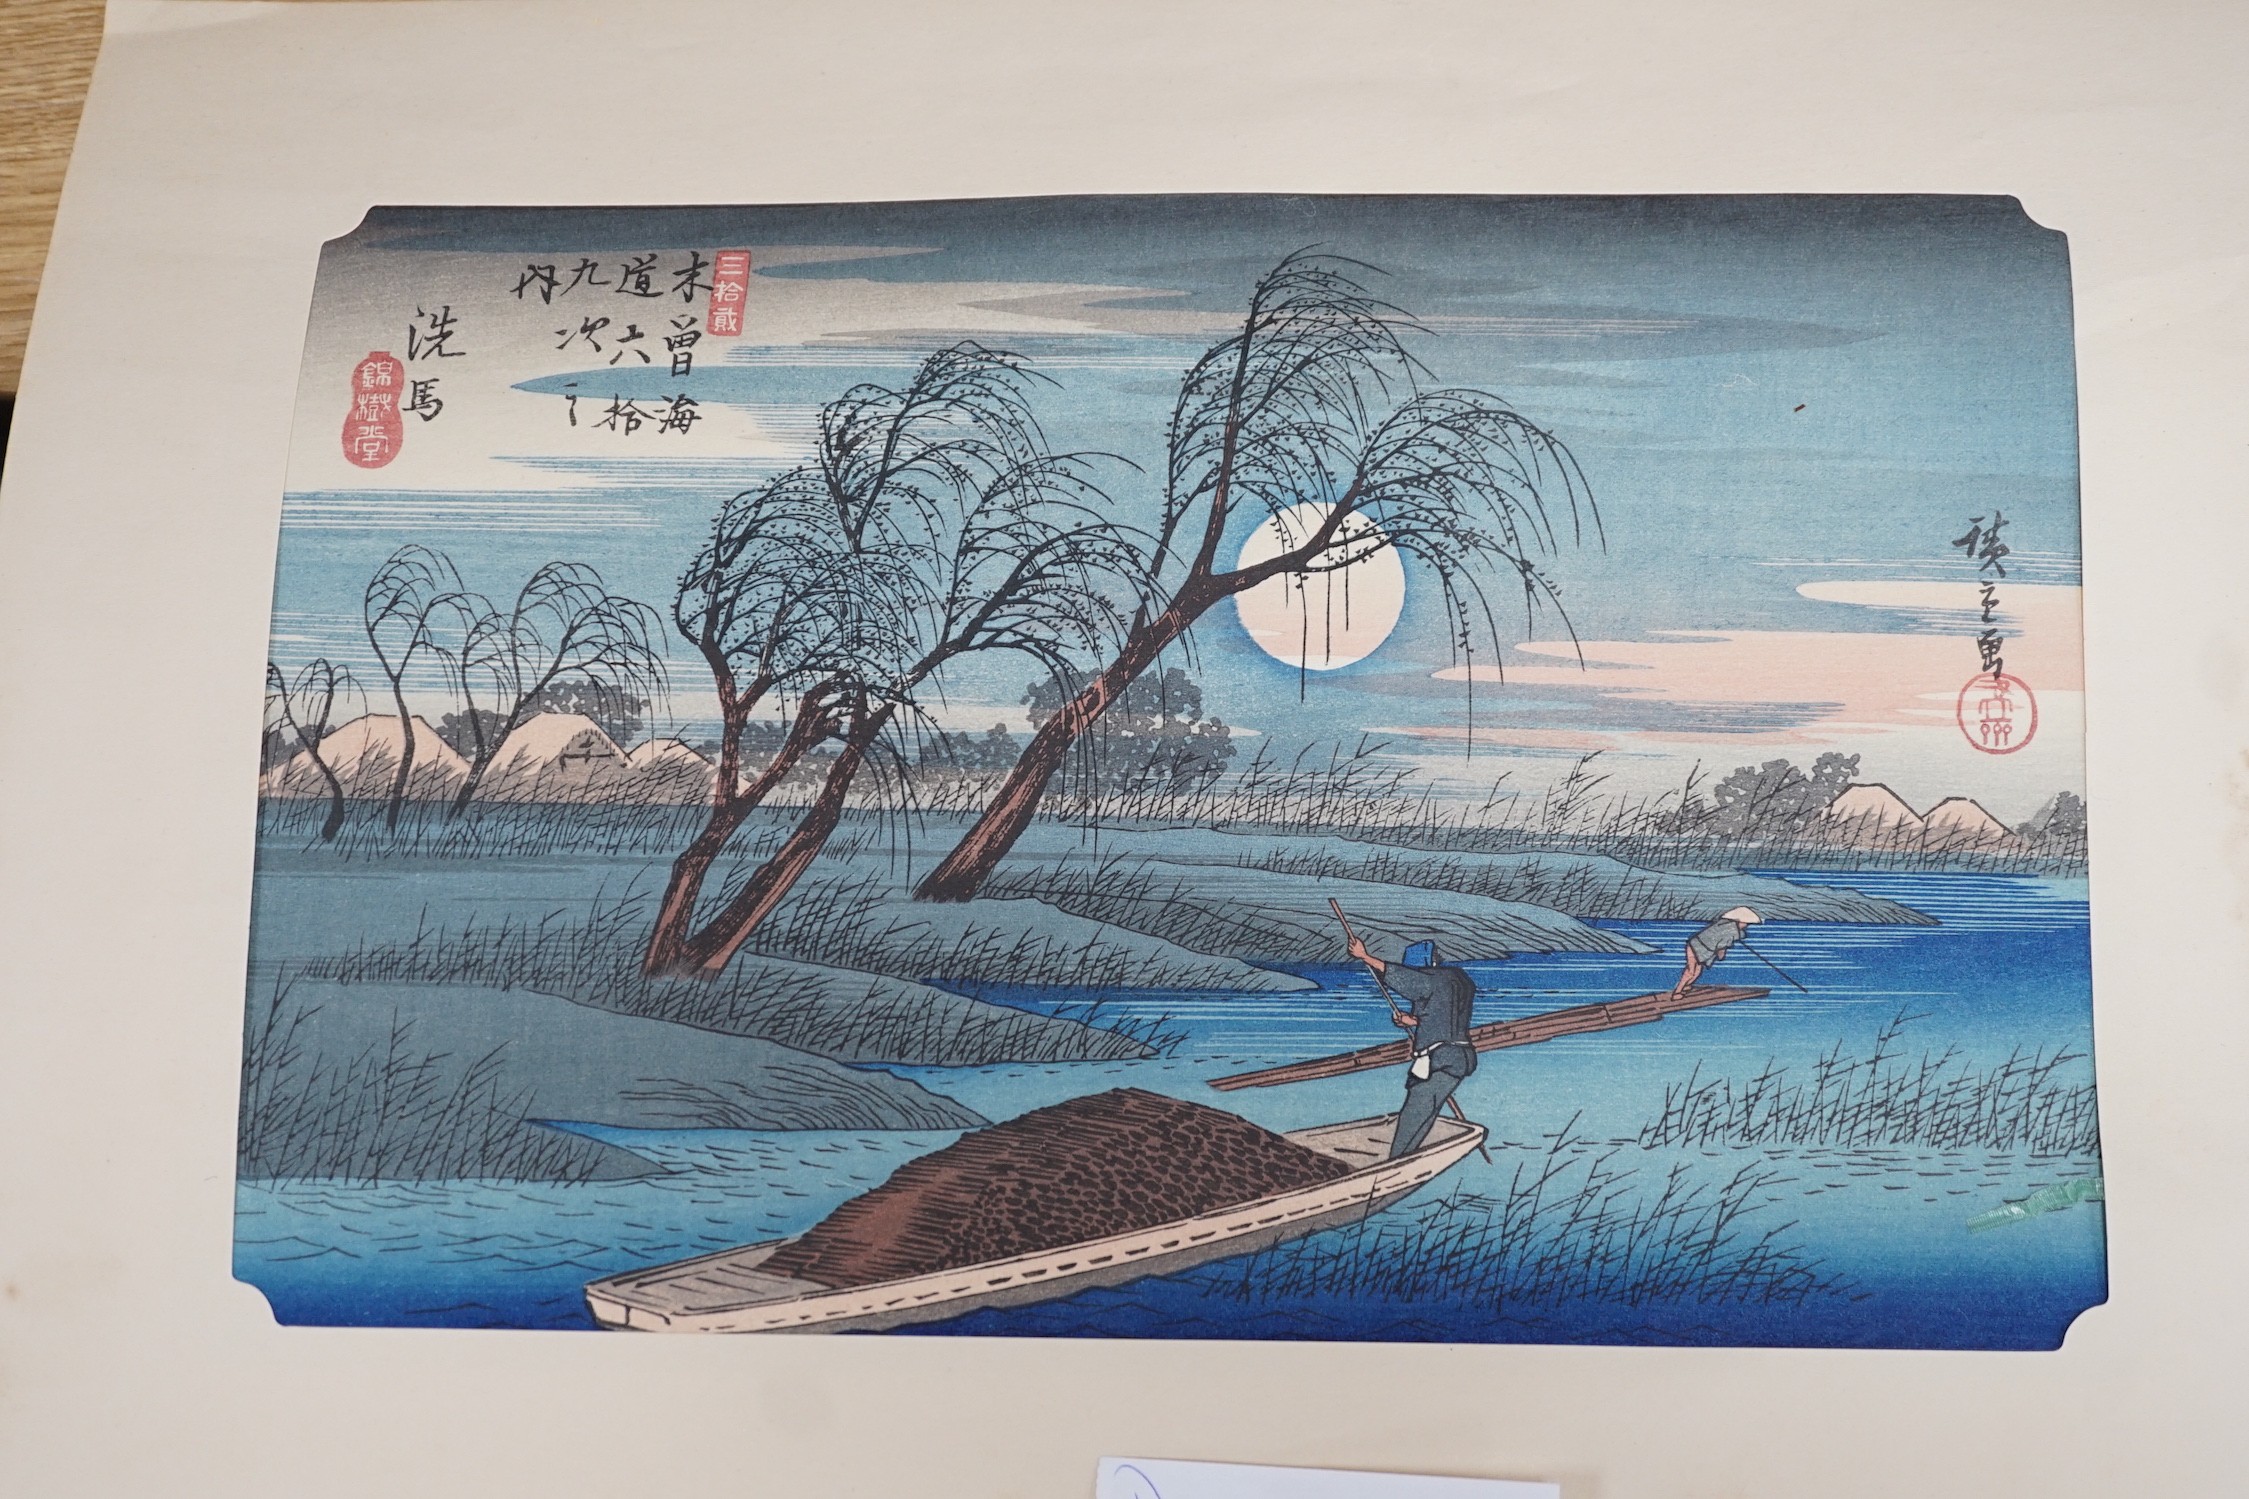 Hiroshige, two woodblock prints, River landscapes, largest overall 33 x 44cm, unframed